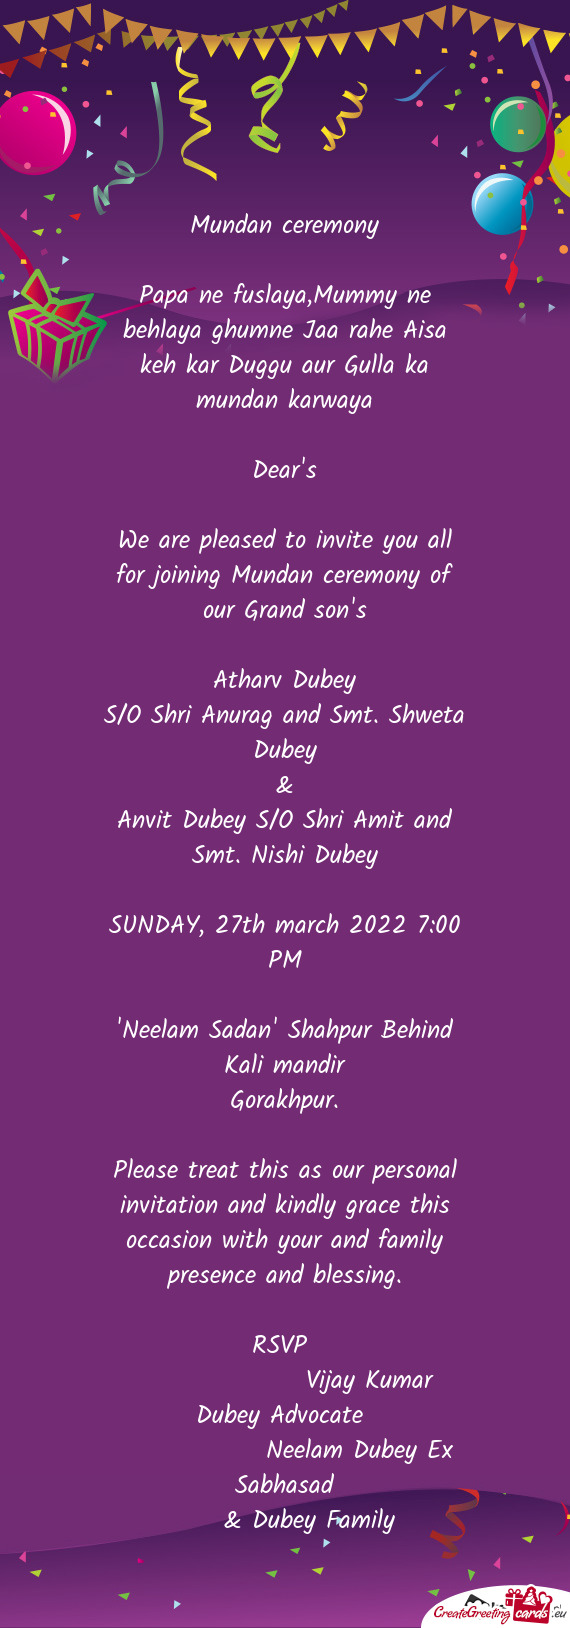 We are pleased to invite you all for joining Mundan ceremony of our Grand son